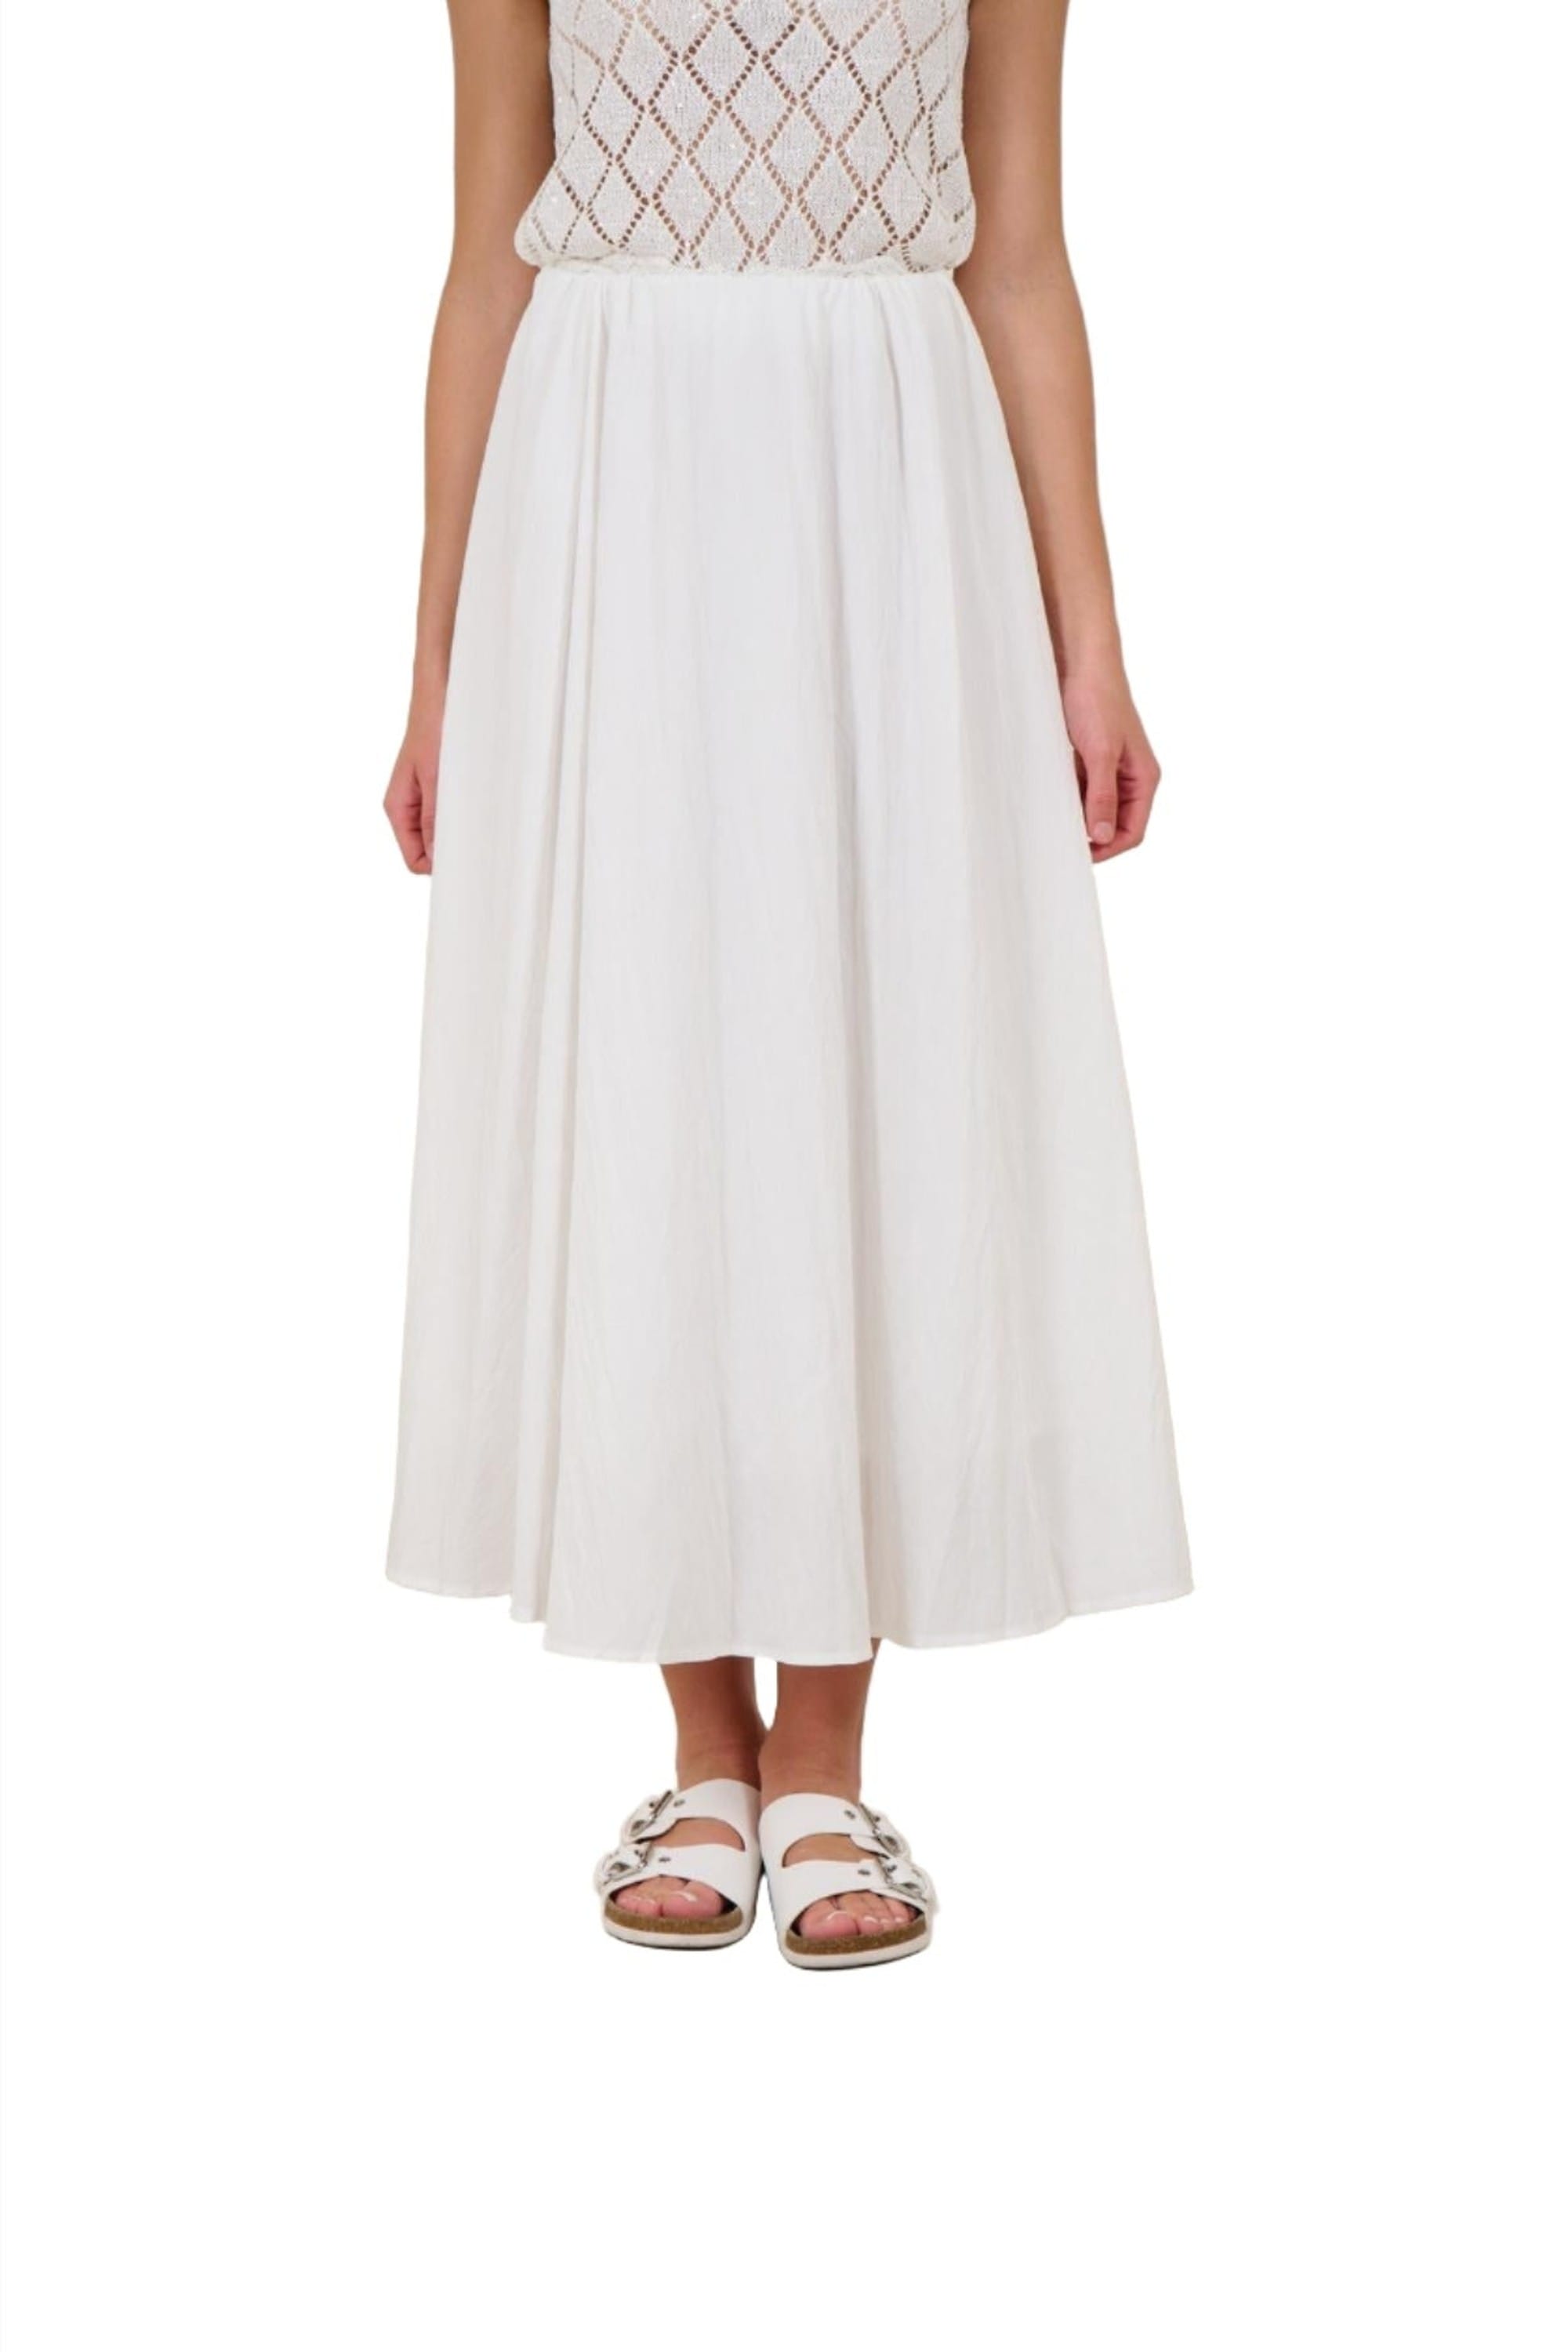 Clever Alice Isabel Skirt in White